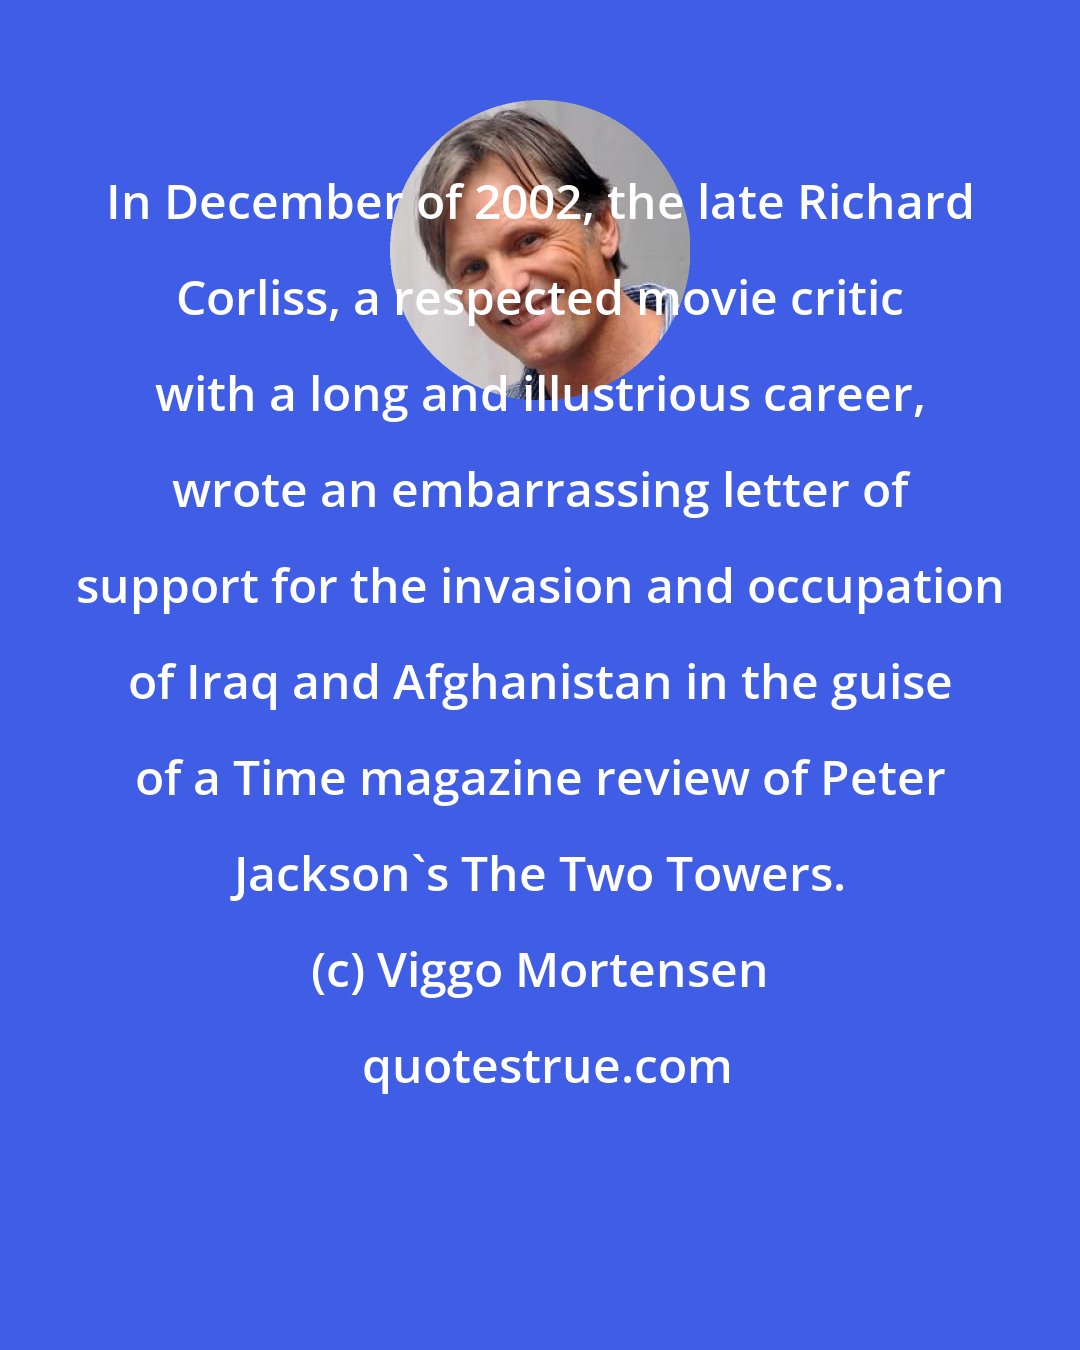 Viggo Mortensen: In December of 2002, the late Richard Corliss, a respected movie critic with a long and illustrious career, wrote an embarrassing letter of support for the invasion and occupation of Iraq and Afghanistan in the guise of a Time magazine review of Peter Jackson's The Two Towers.